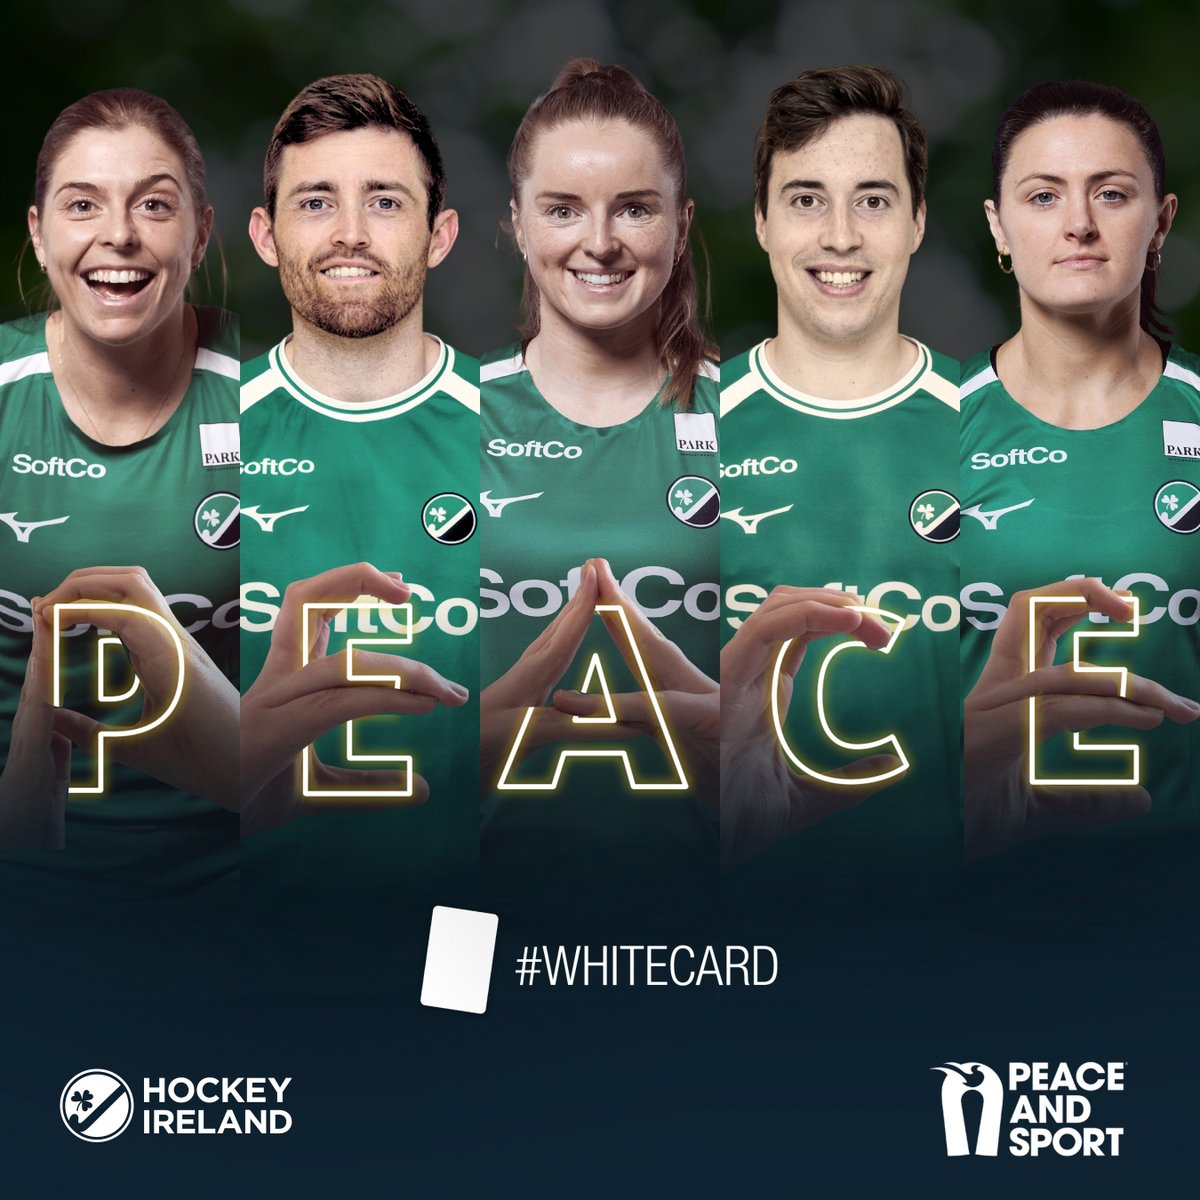 PEACE & SPORT Today is the International Day of Sport for Development and Peace. Our hockey community is proud to support this annual celebration of the power of sport to drive social change and community development to foster peace 🕊️ #WHITECARD #IDSDP #ChampionsforPeace